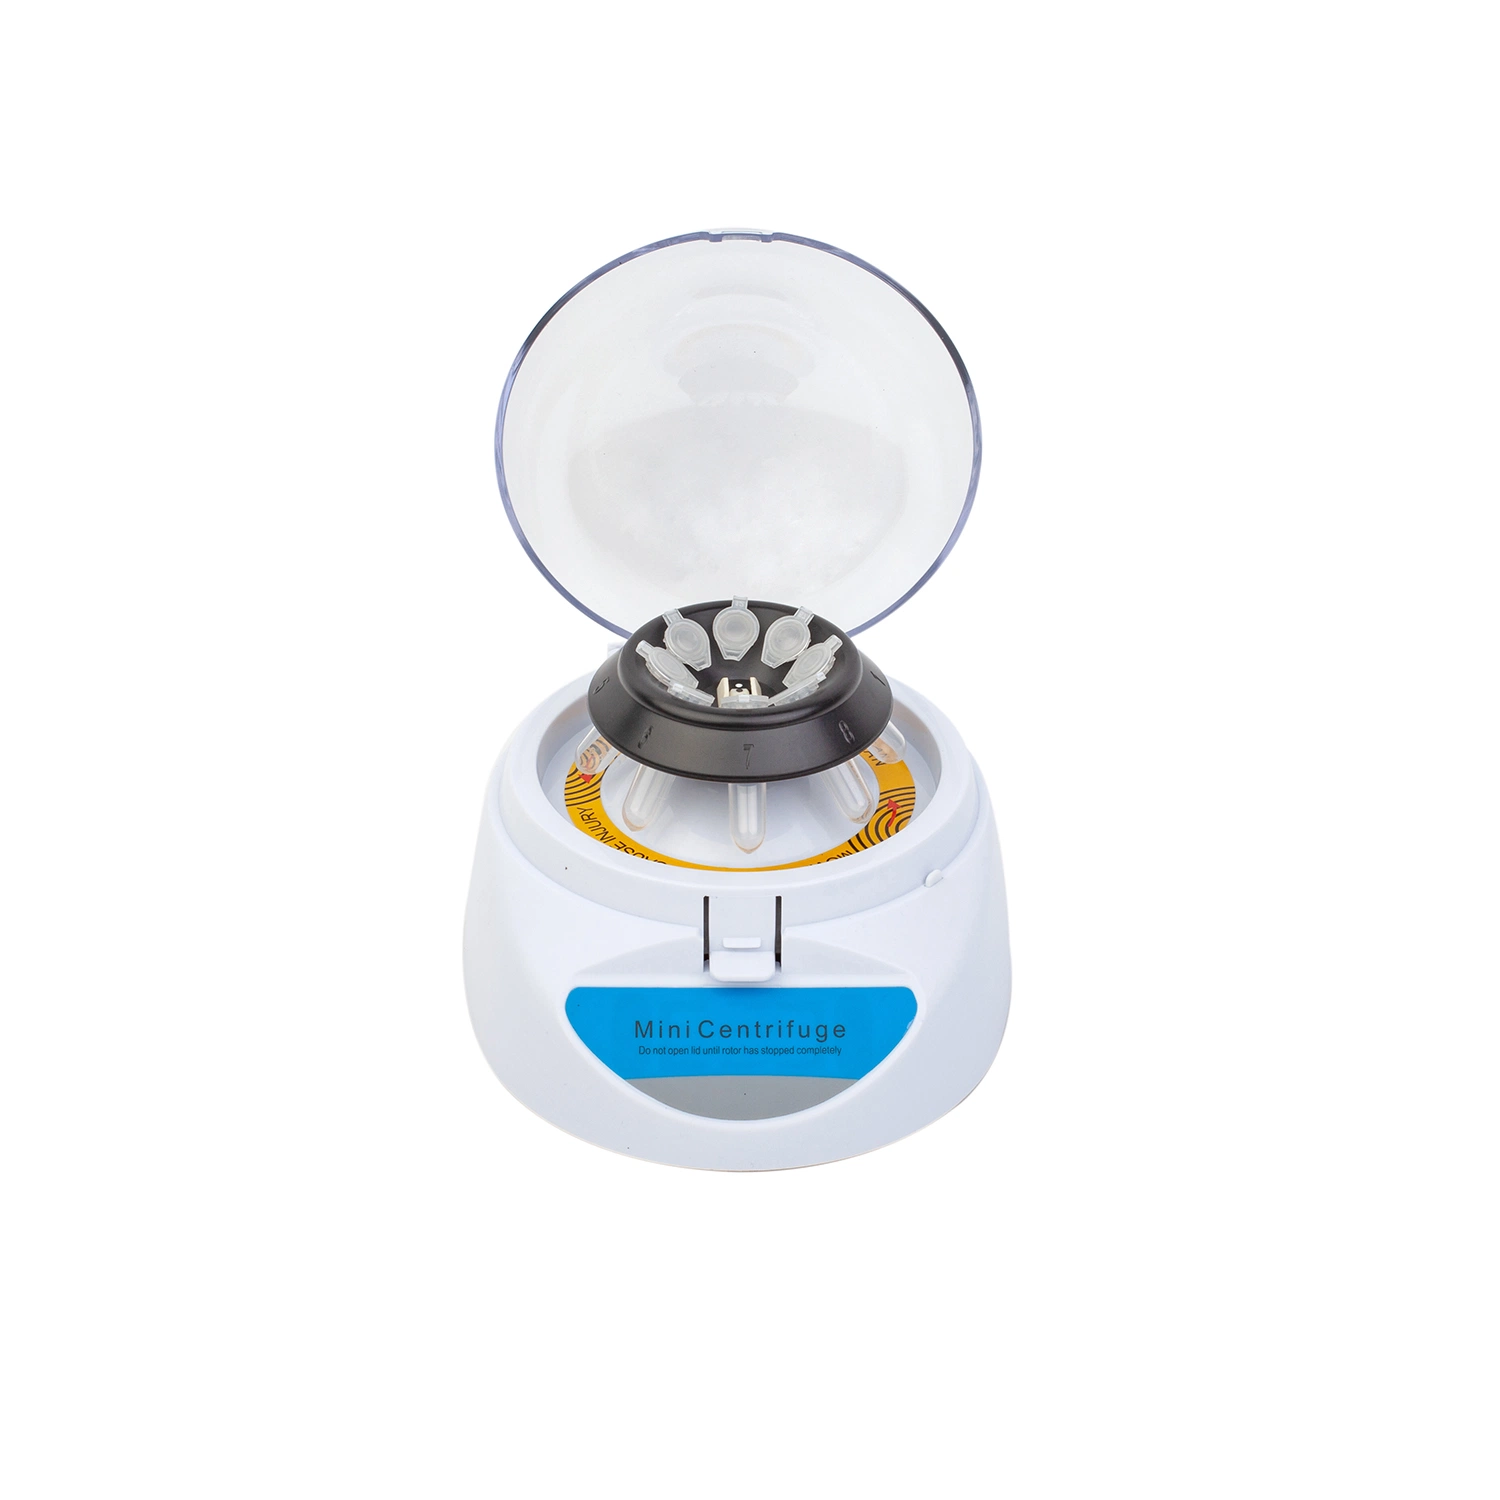 China Supplier New Type Low Speed Prp Mini Decanter Centrifuge